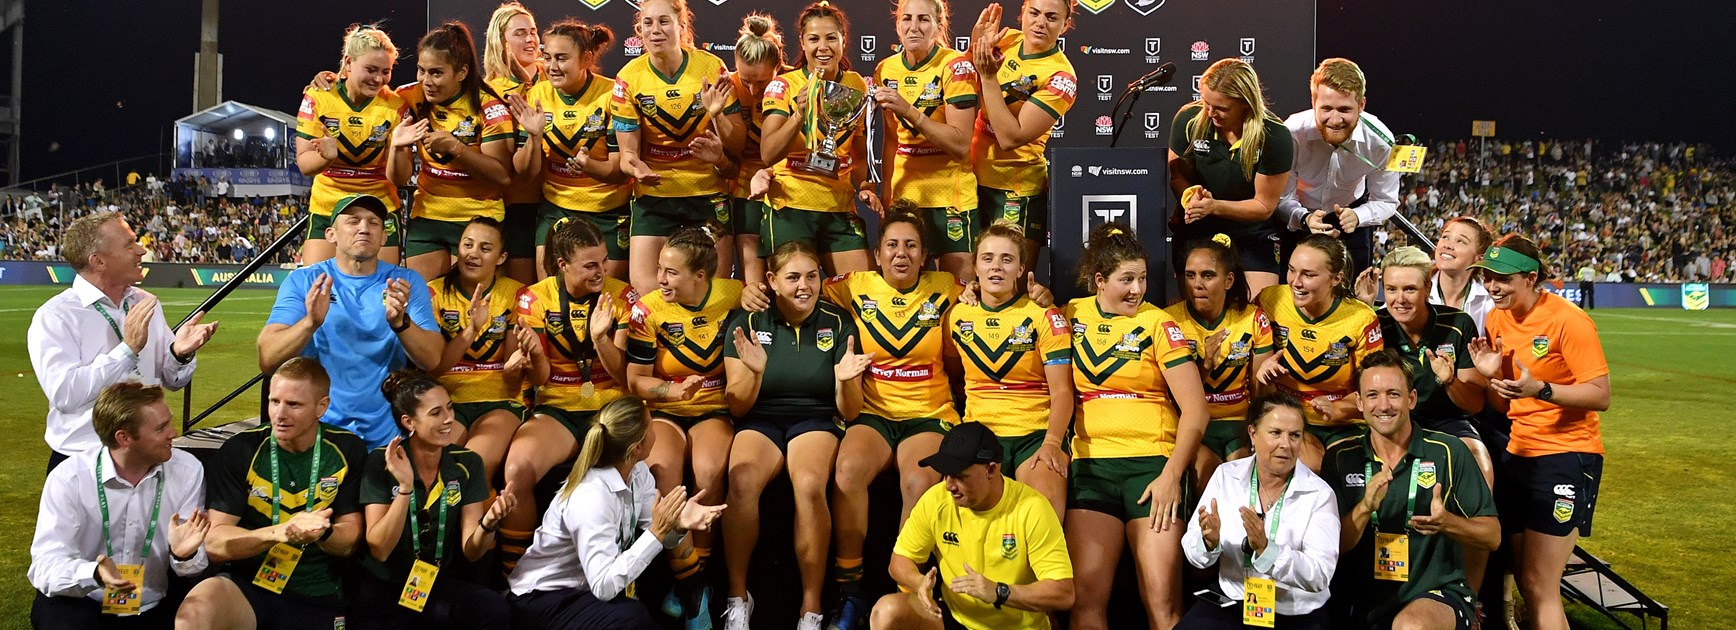 Debbie Brewin (bottom right) celebrates with the Jillaroos after last year's Test win over New Zealand in Wollongong.